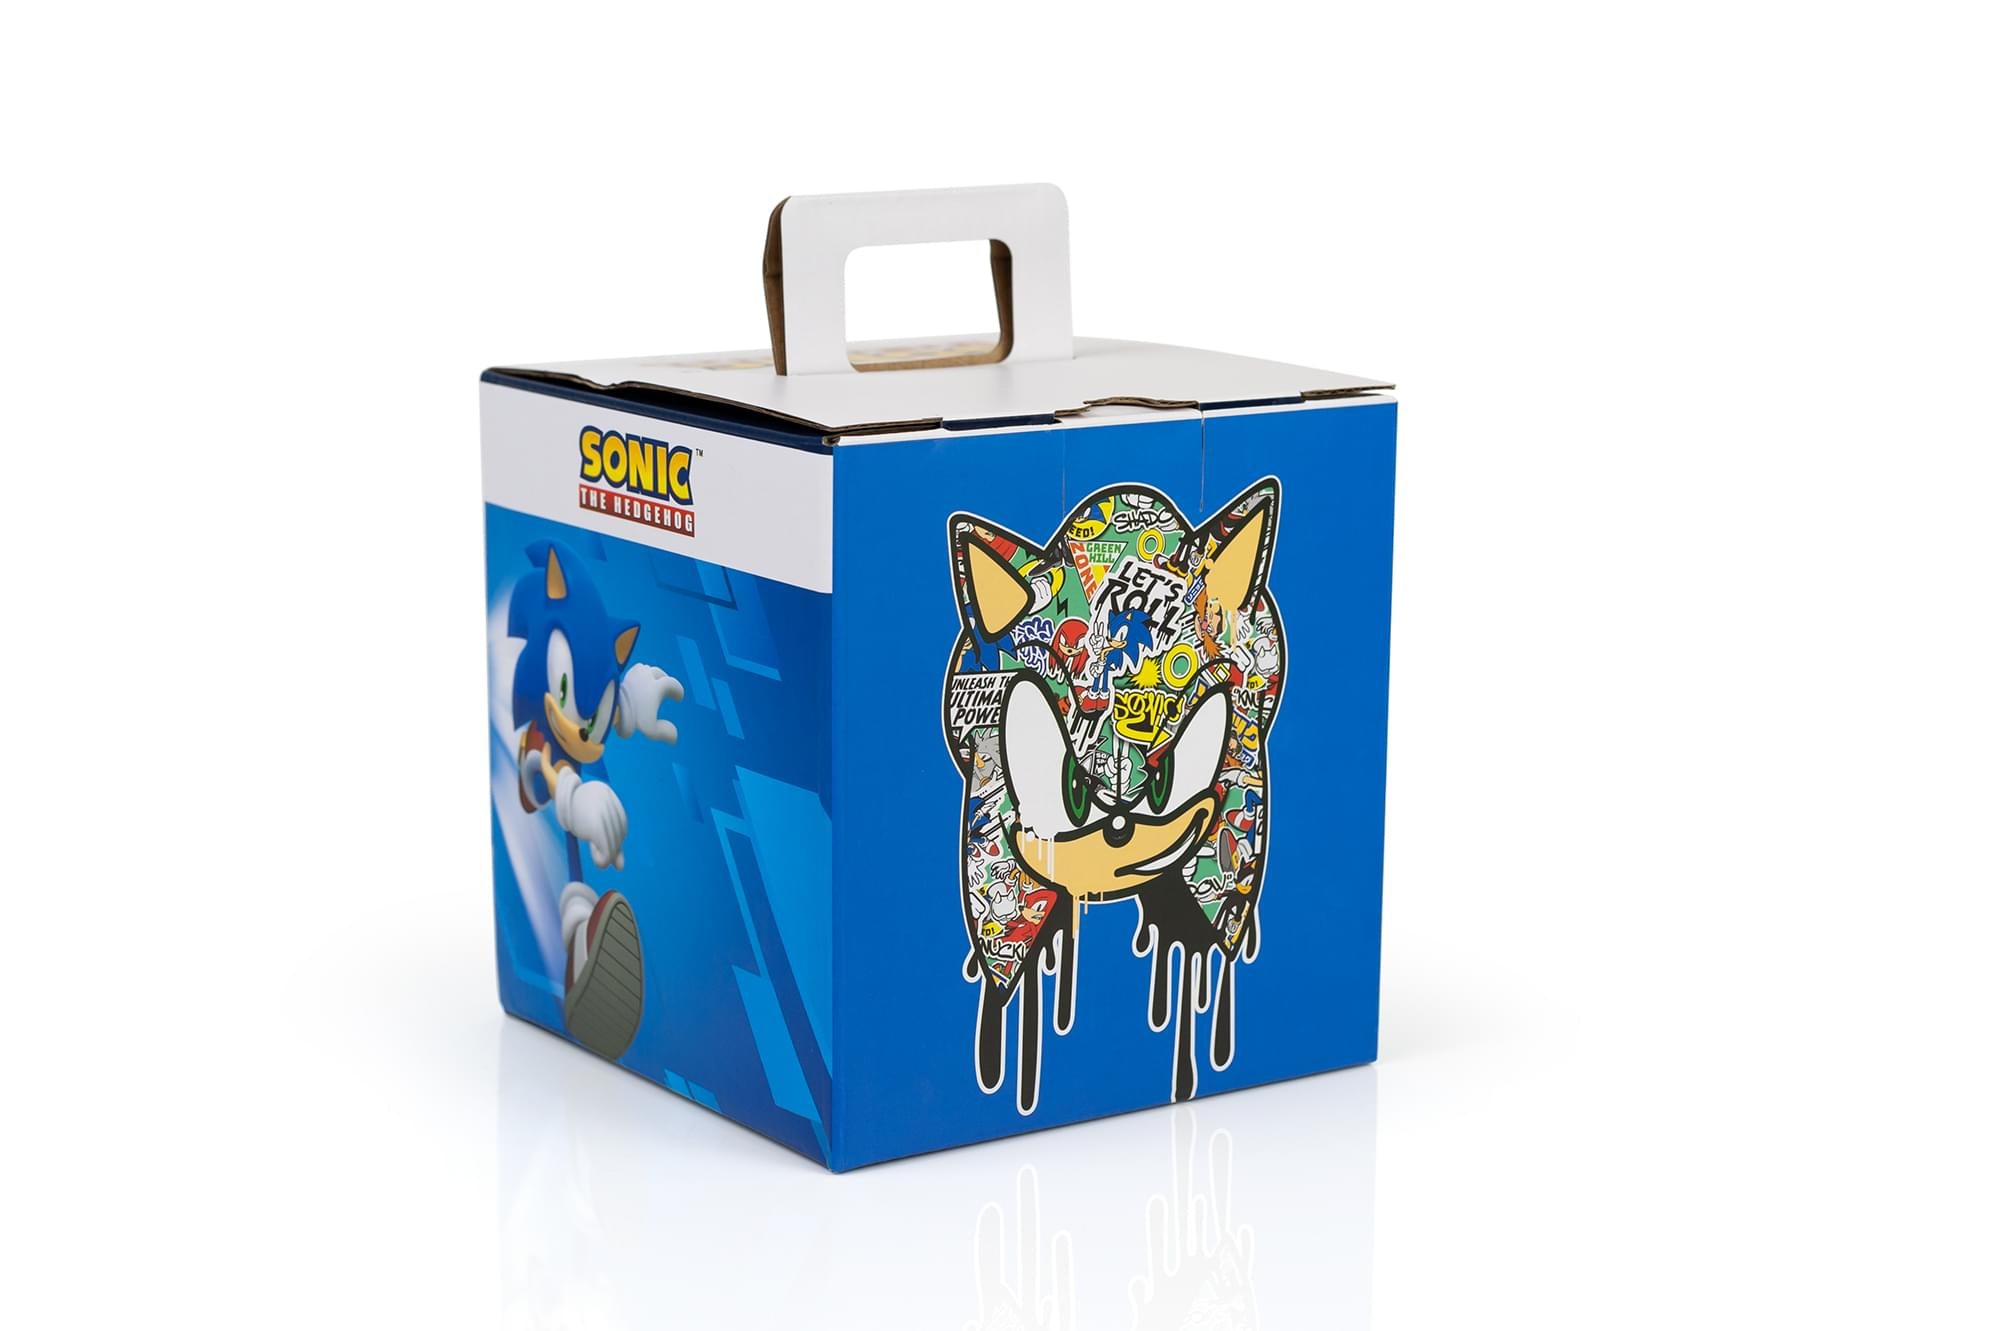 Sonic The Hedgehog Urban Modern Collector Looksee Box , Includes 5 Themed Collectibles